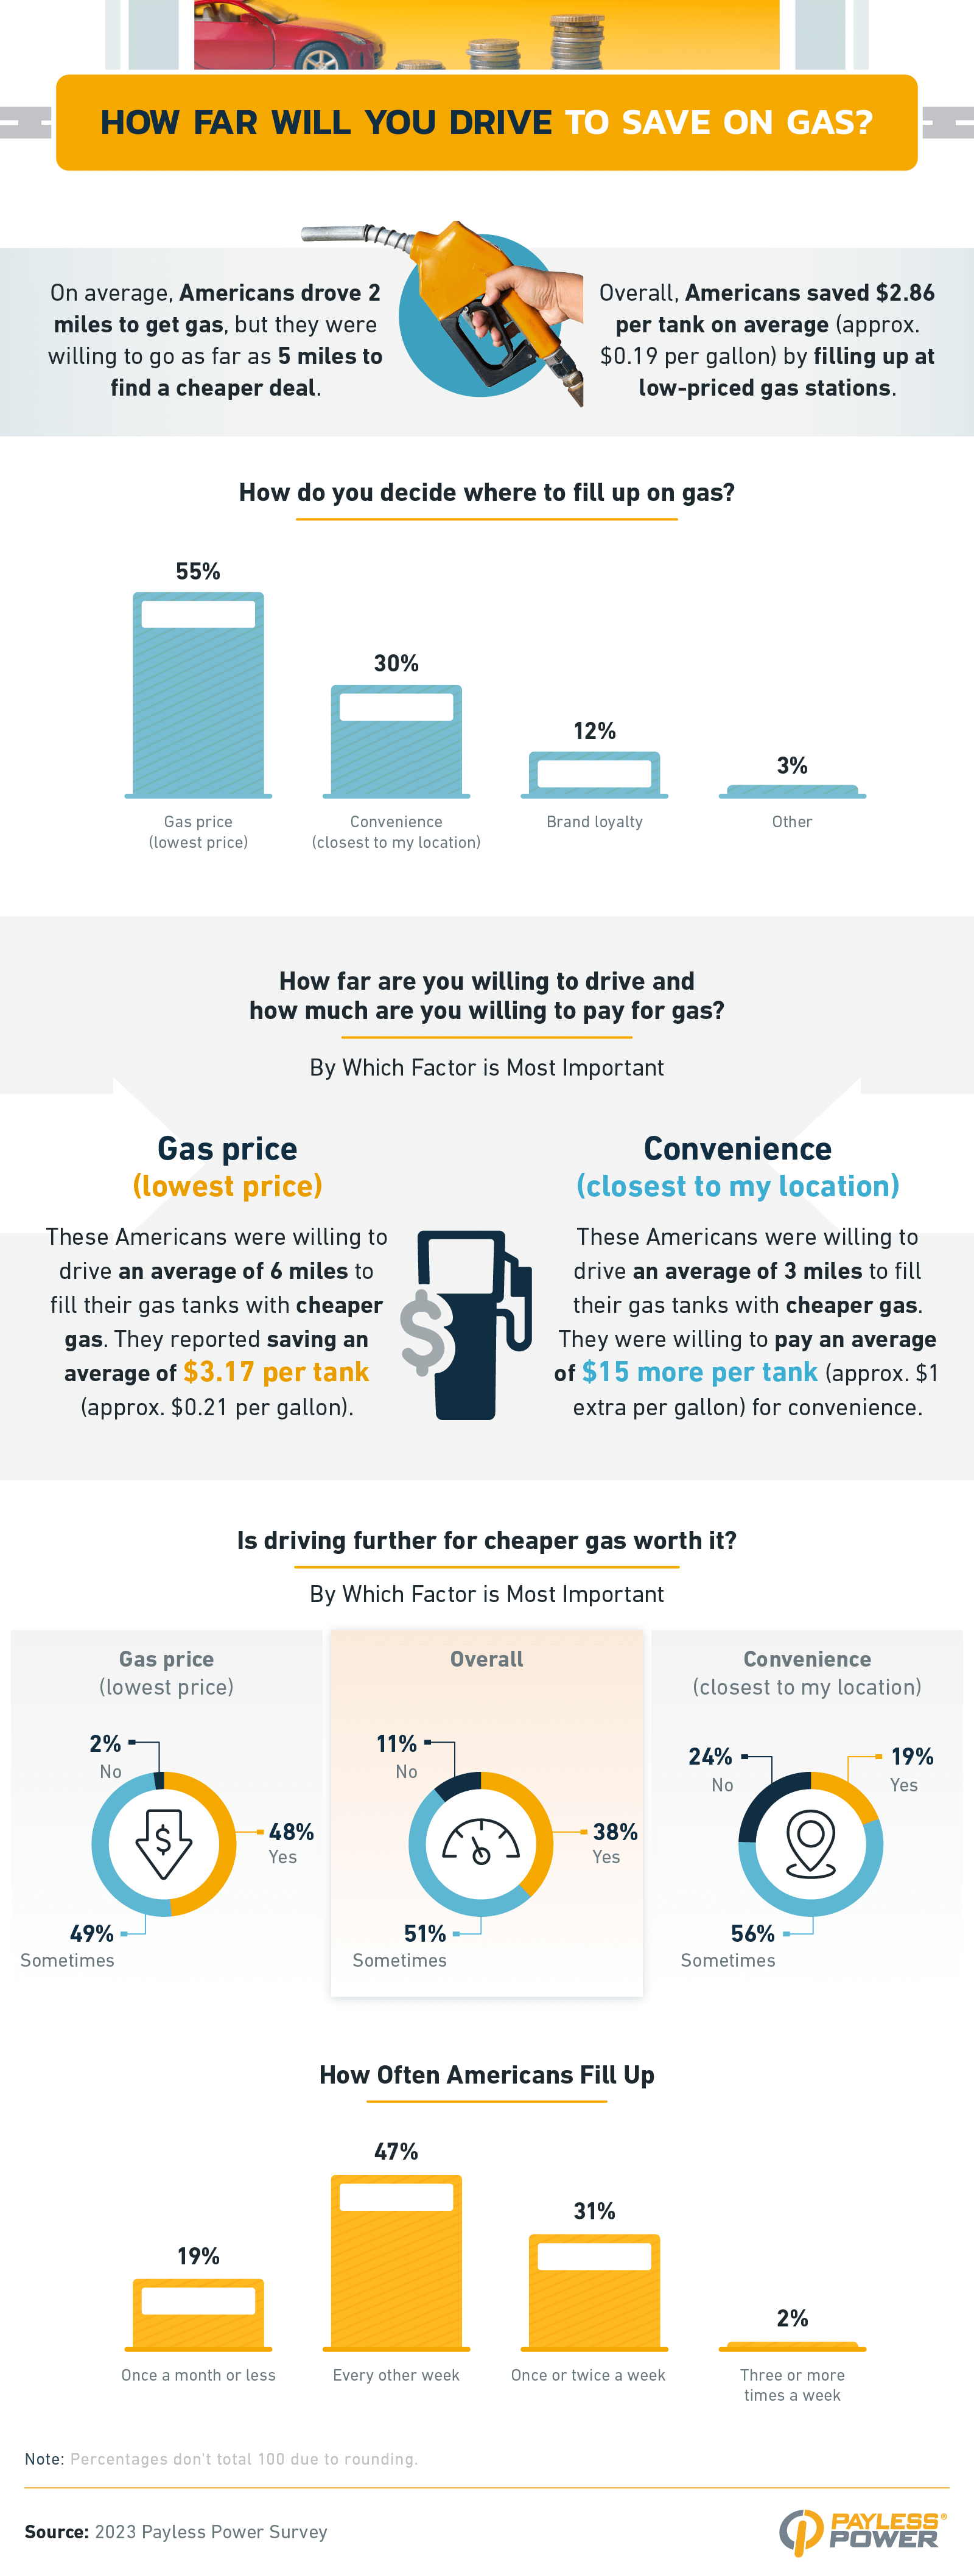 How far are you willing to drive for cheaper gas